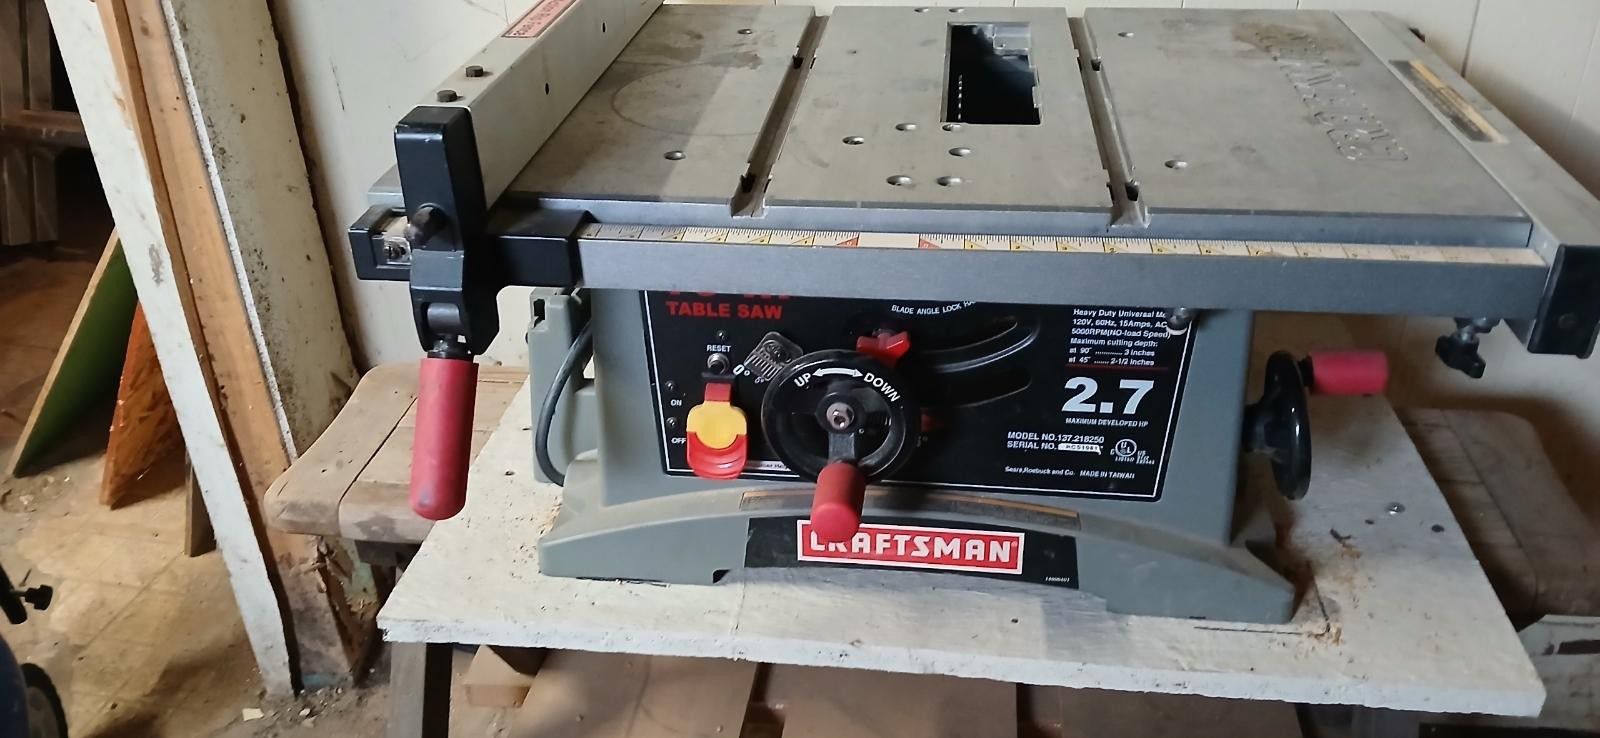 I Have A Air Compressor And Chop Saw 